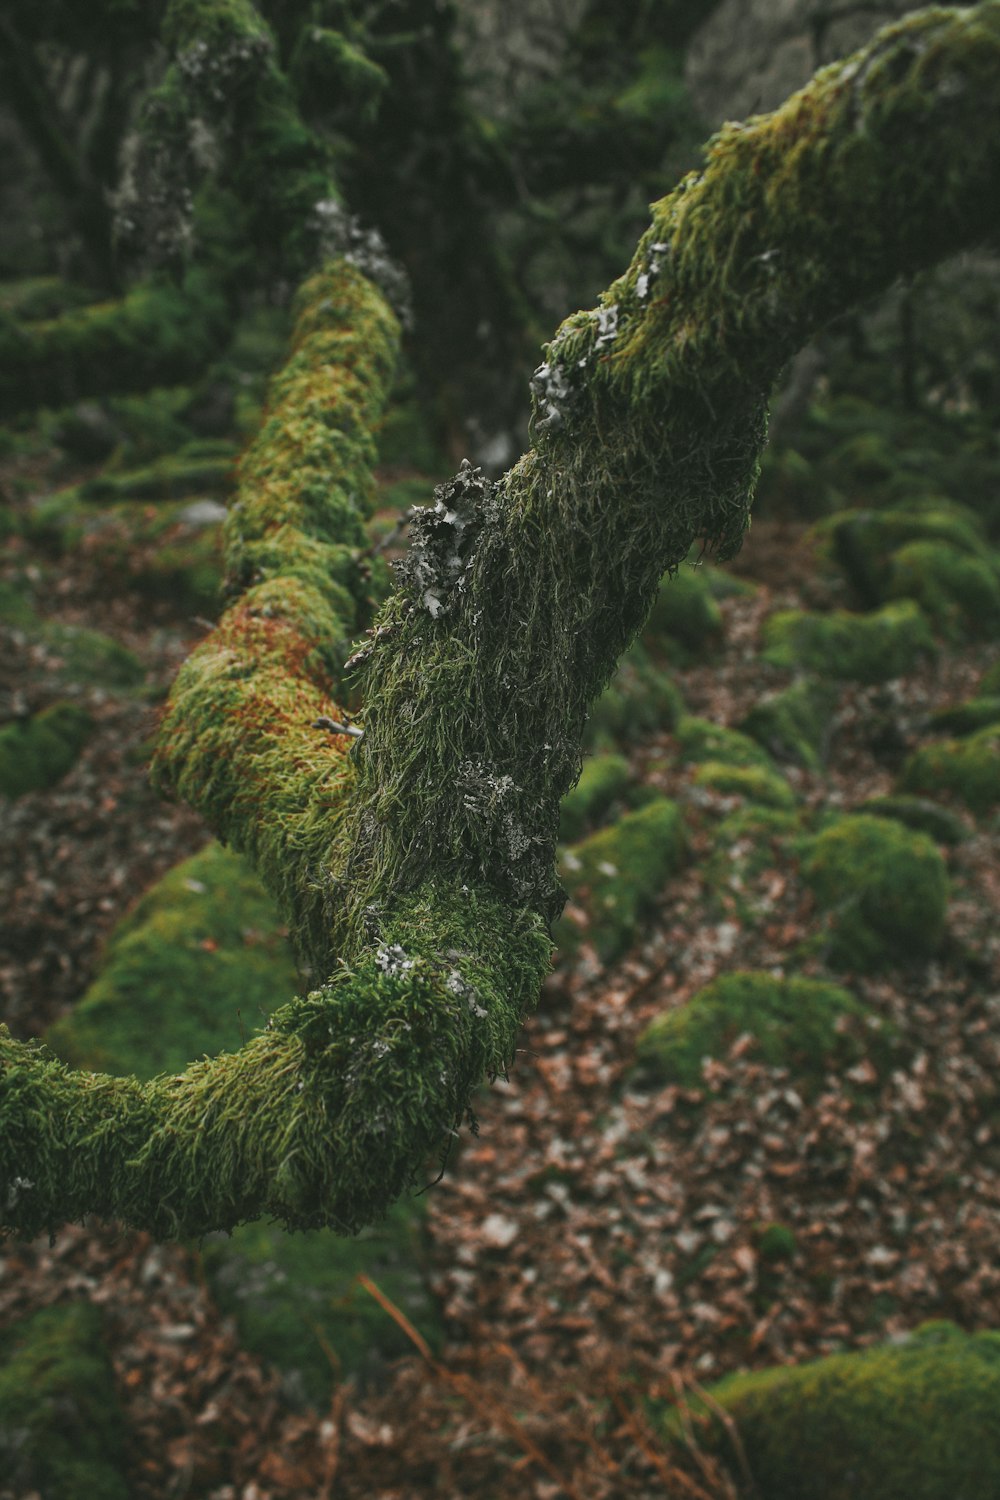 moss growing on a tree branch in a forest